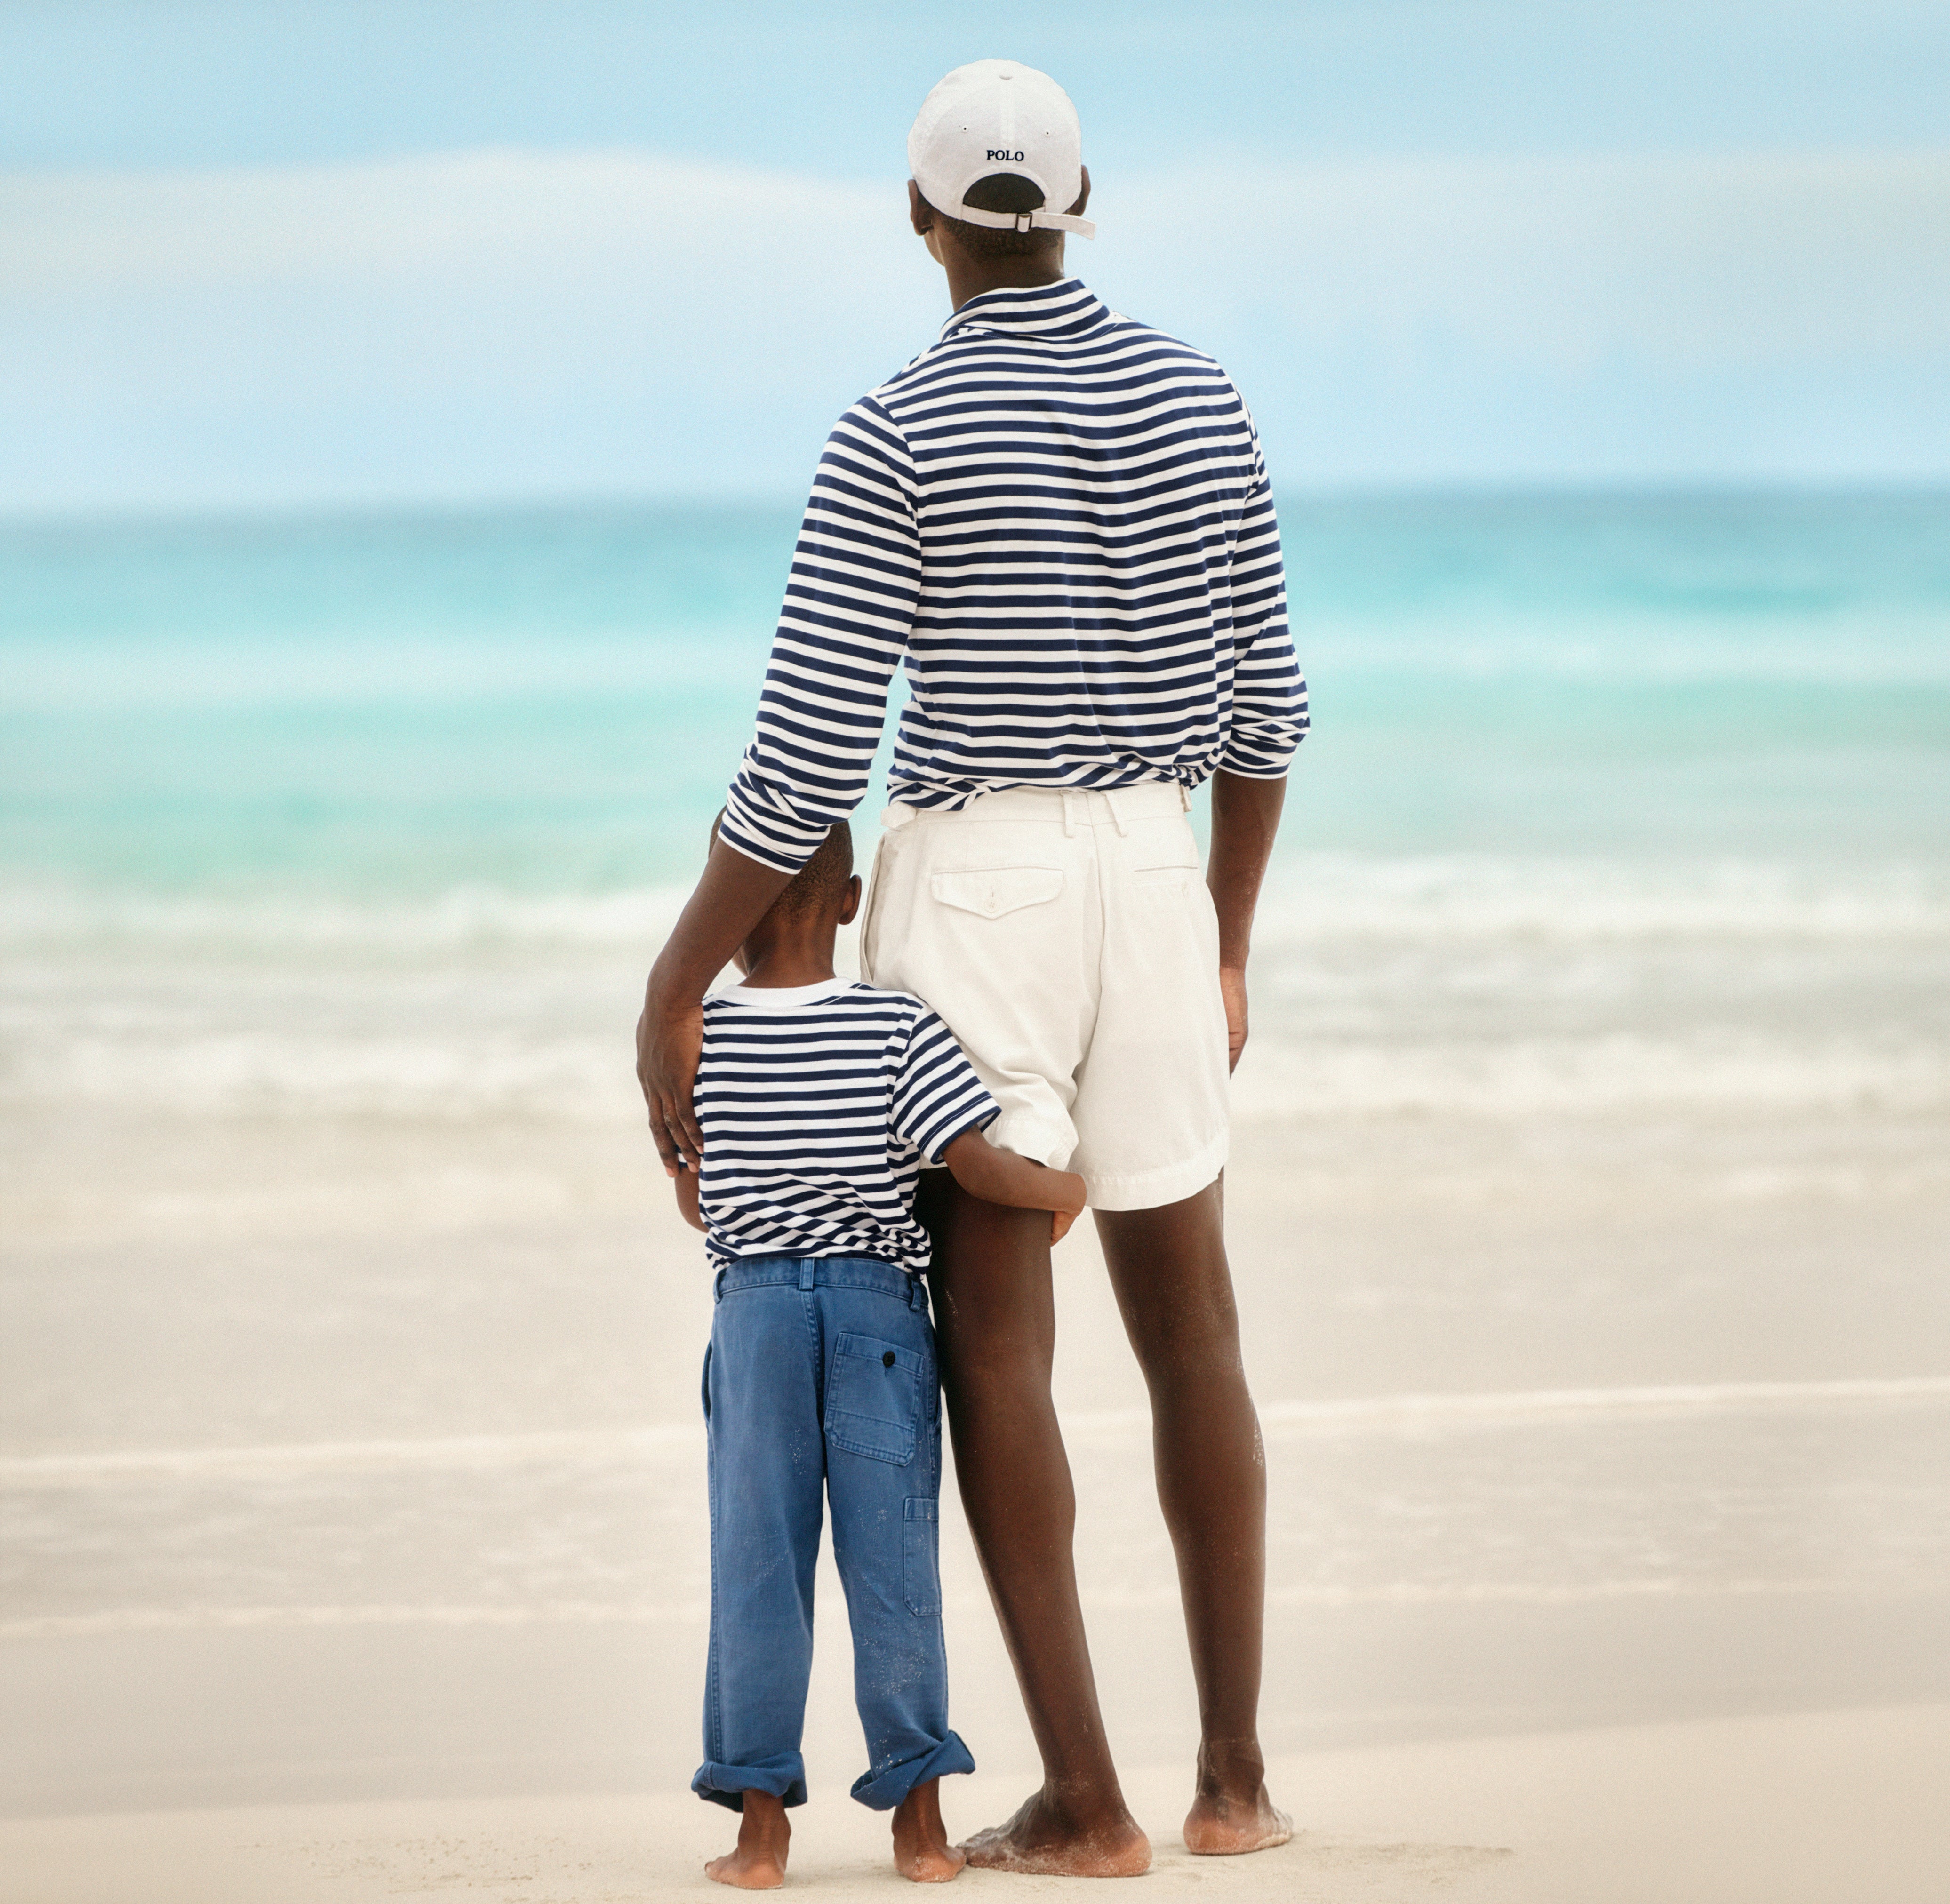 Finding the Perfect Present: Father’s Day Gift Inspiration